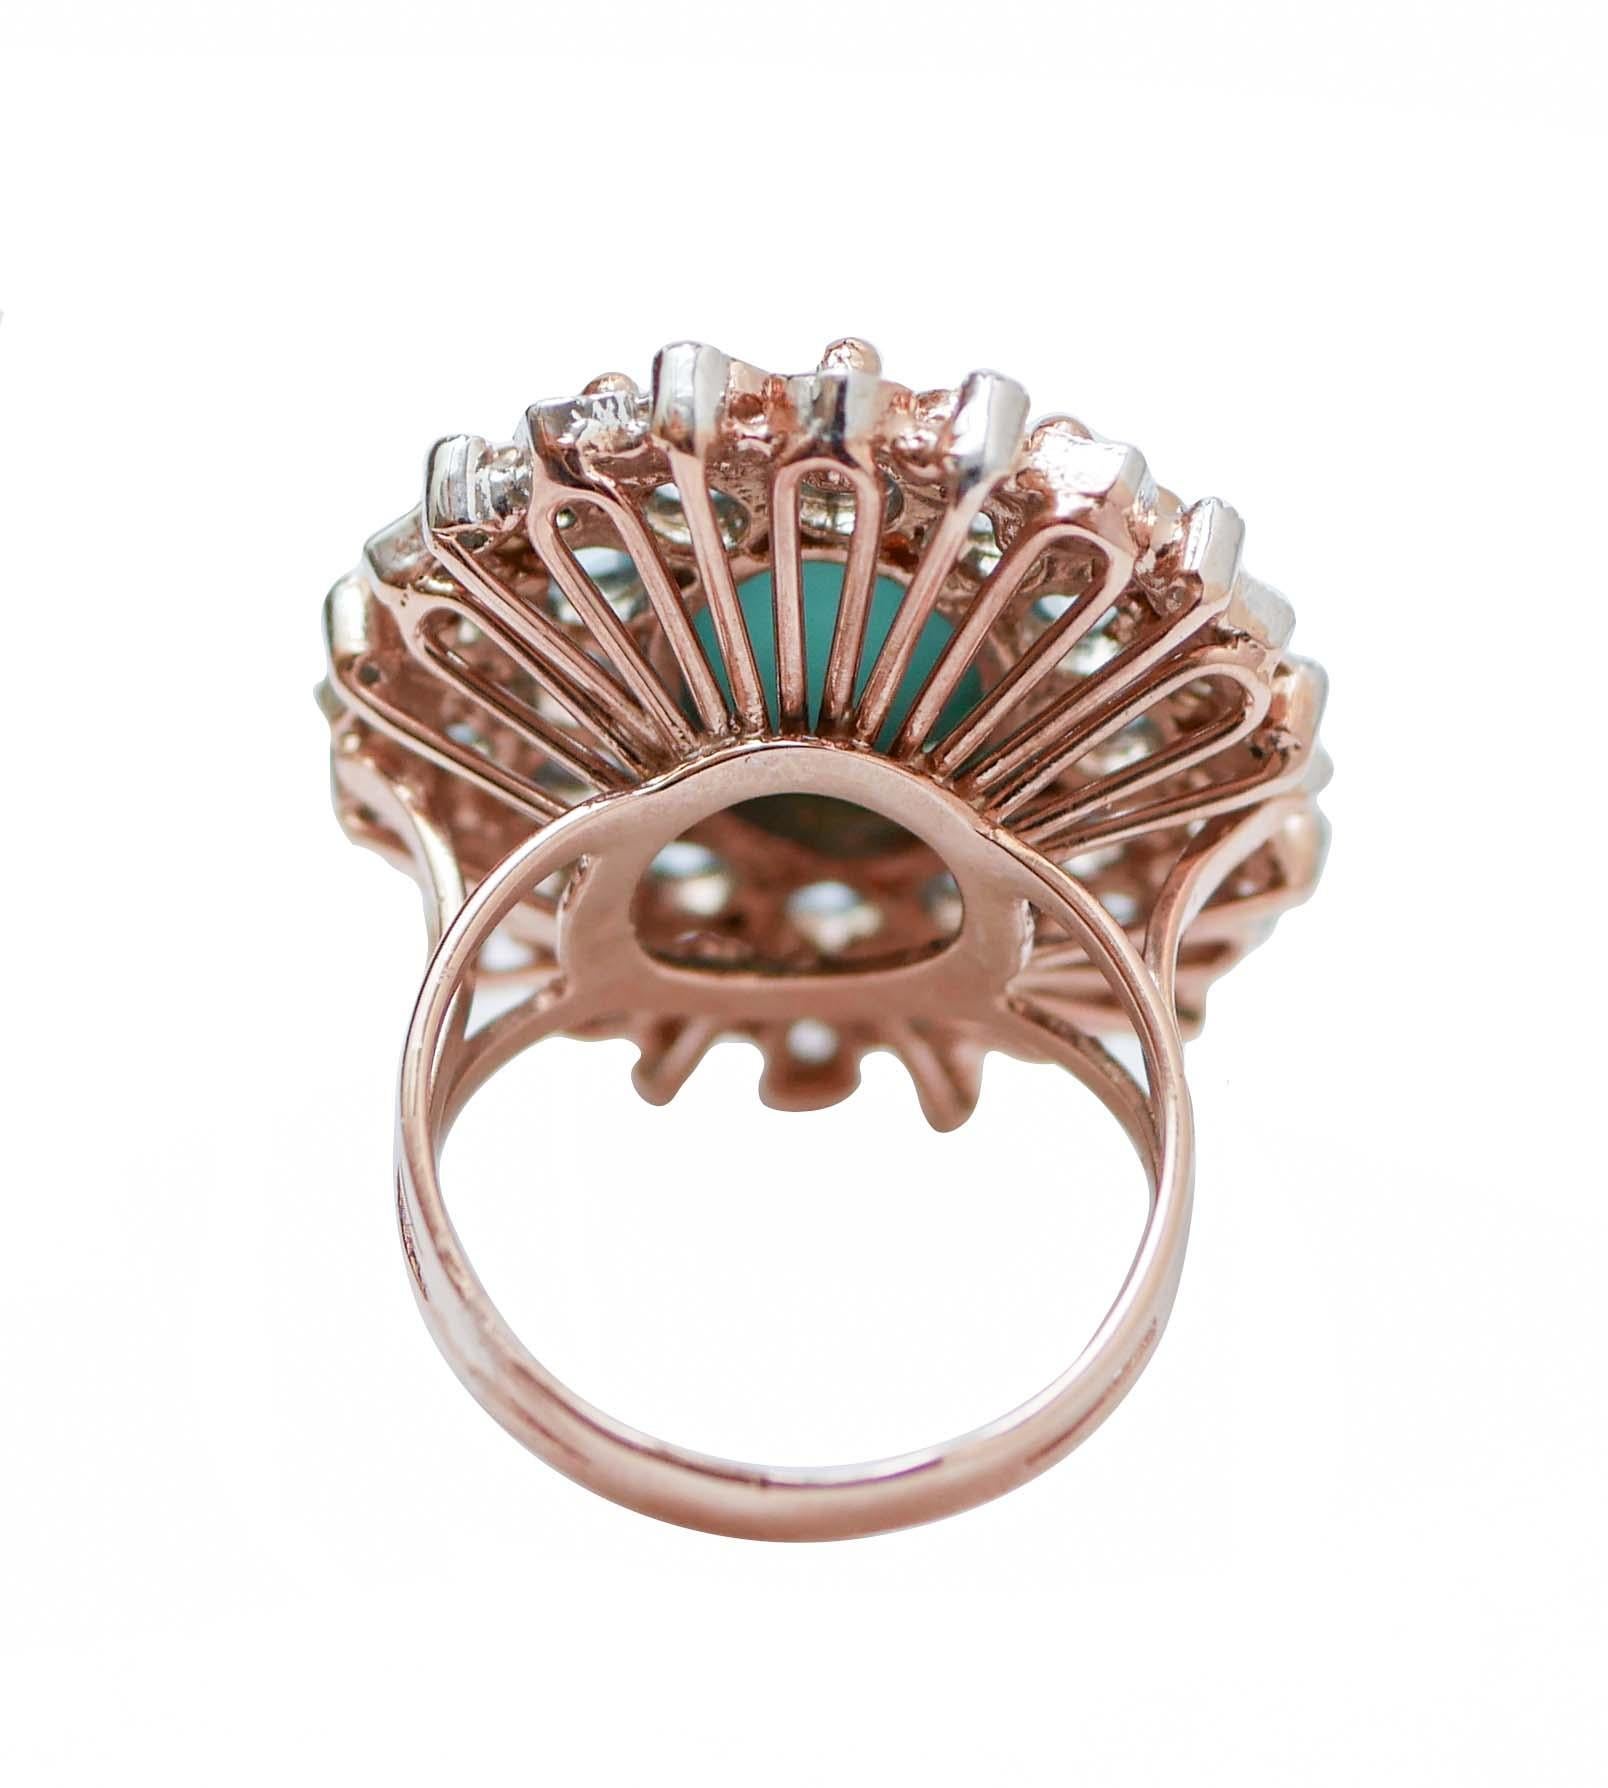 Retro Turquoise, Topazs, Diamonds, Rose Gold and Silver Ring.